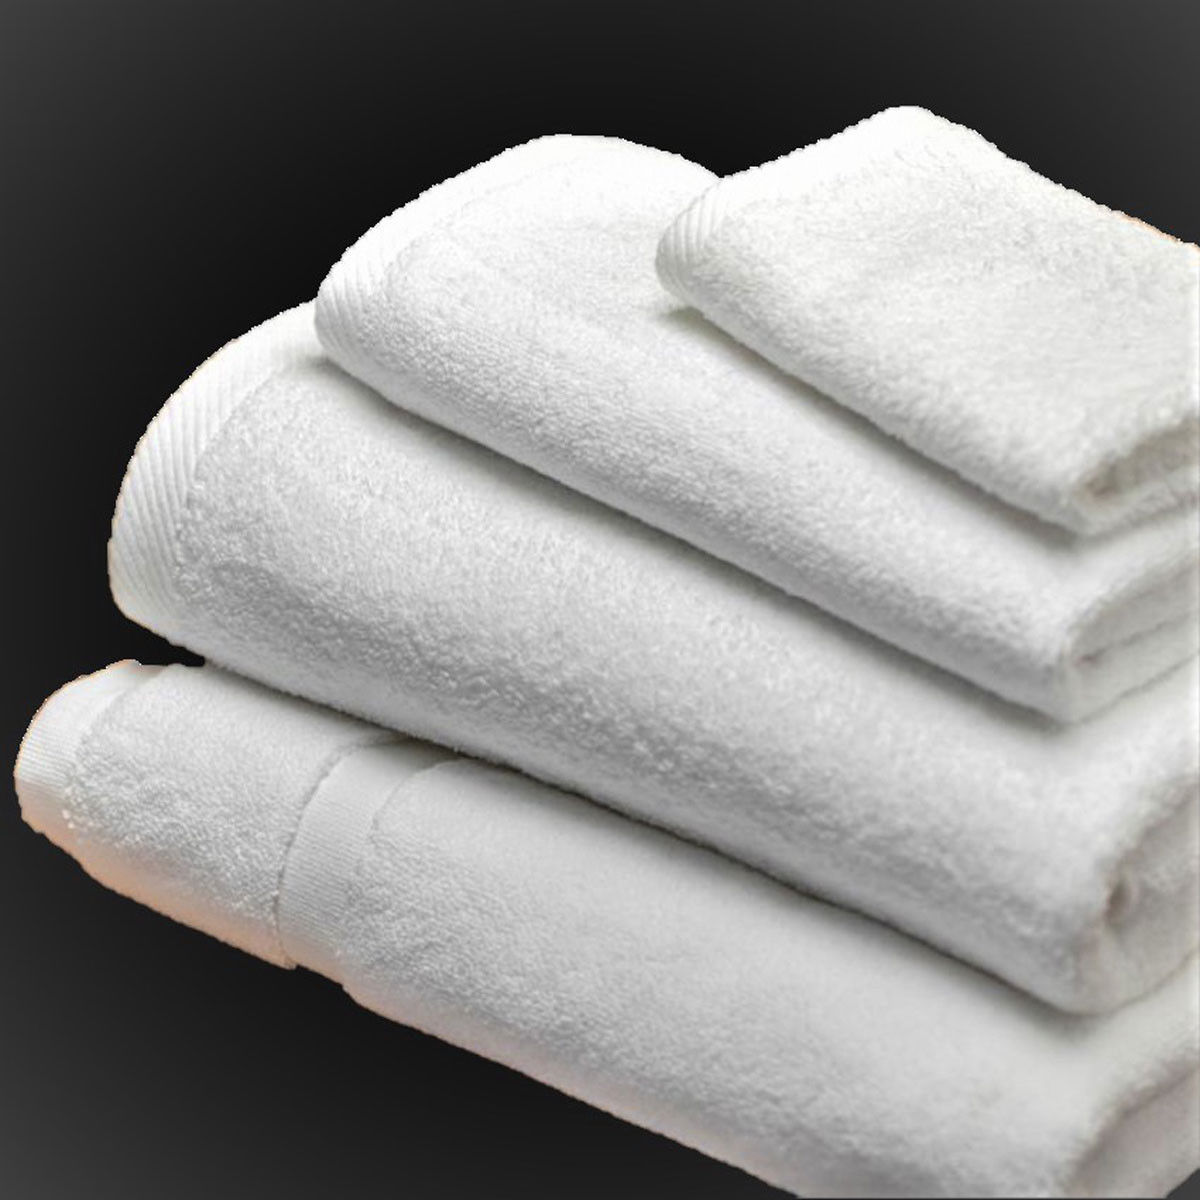 How to care for bulk bath towels wholesale to keep them soft?